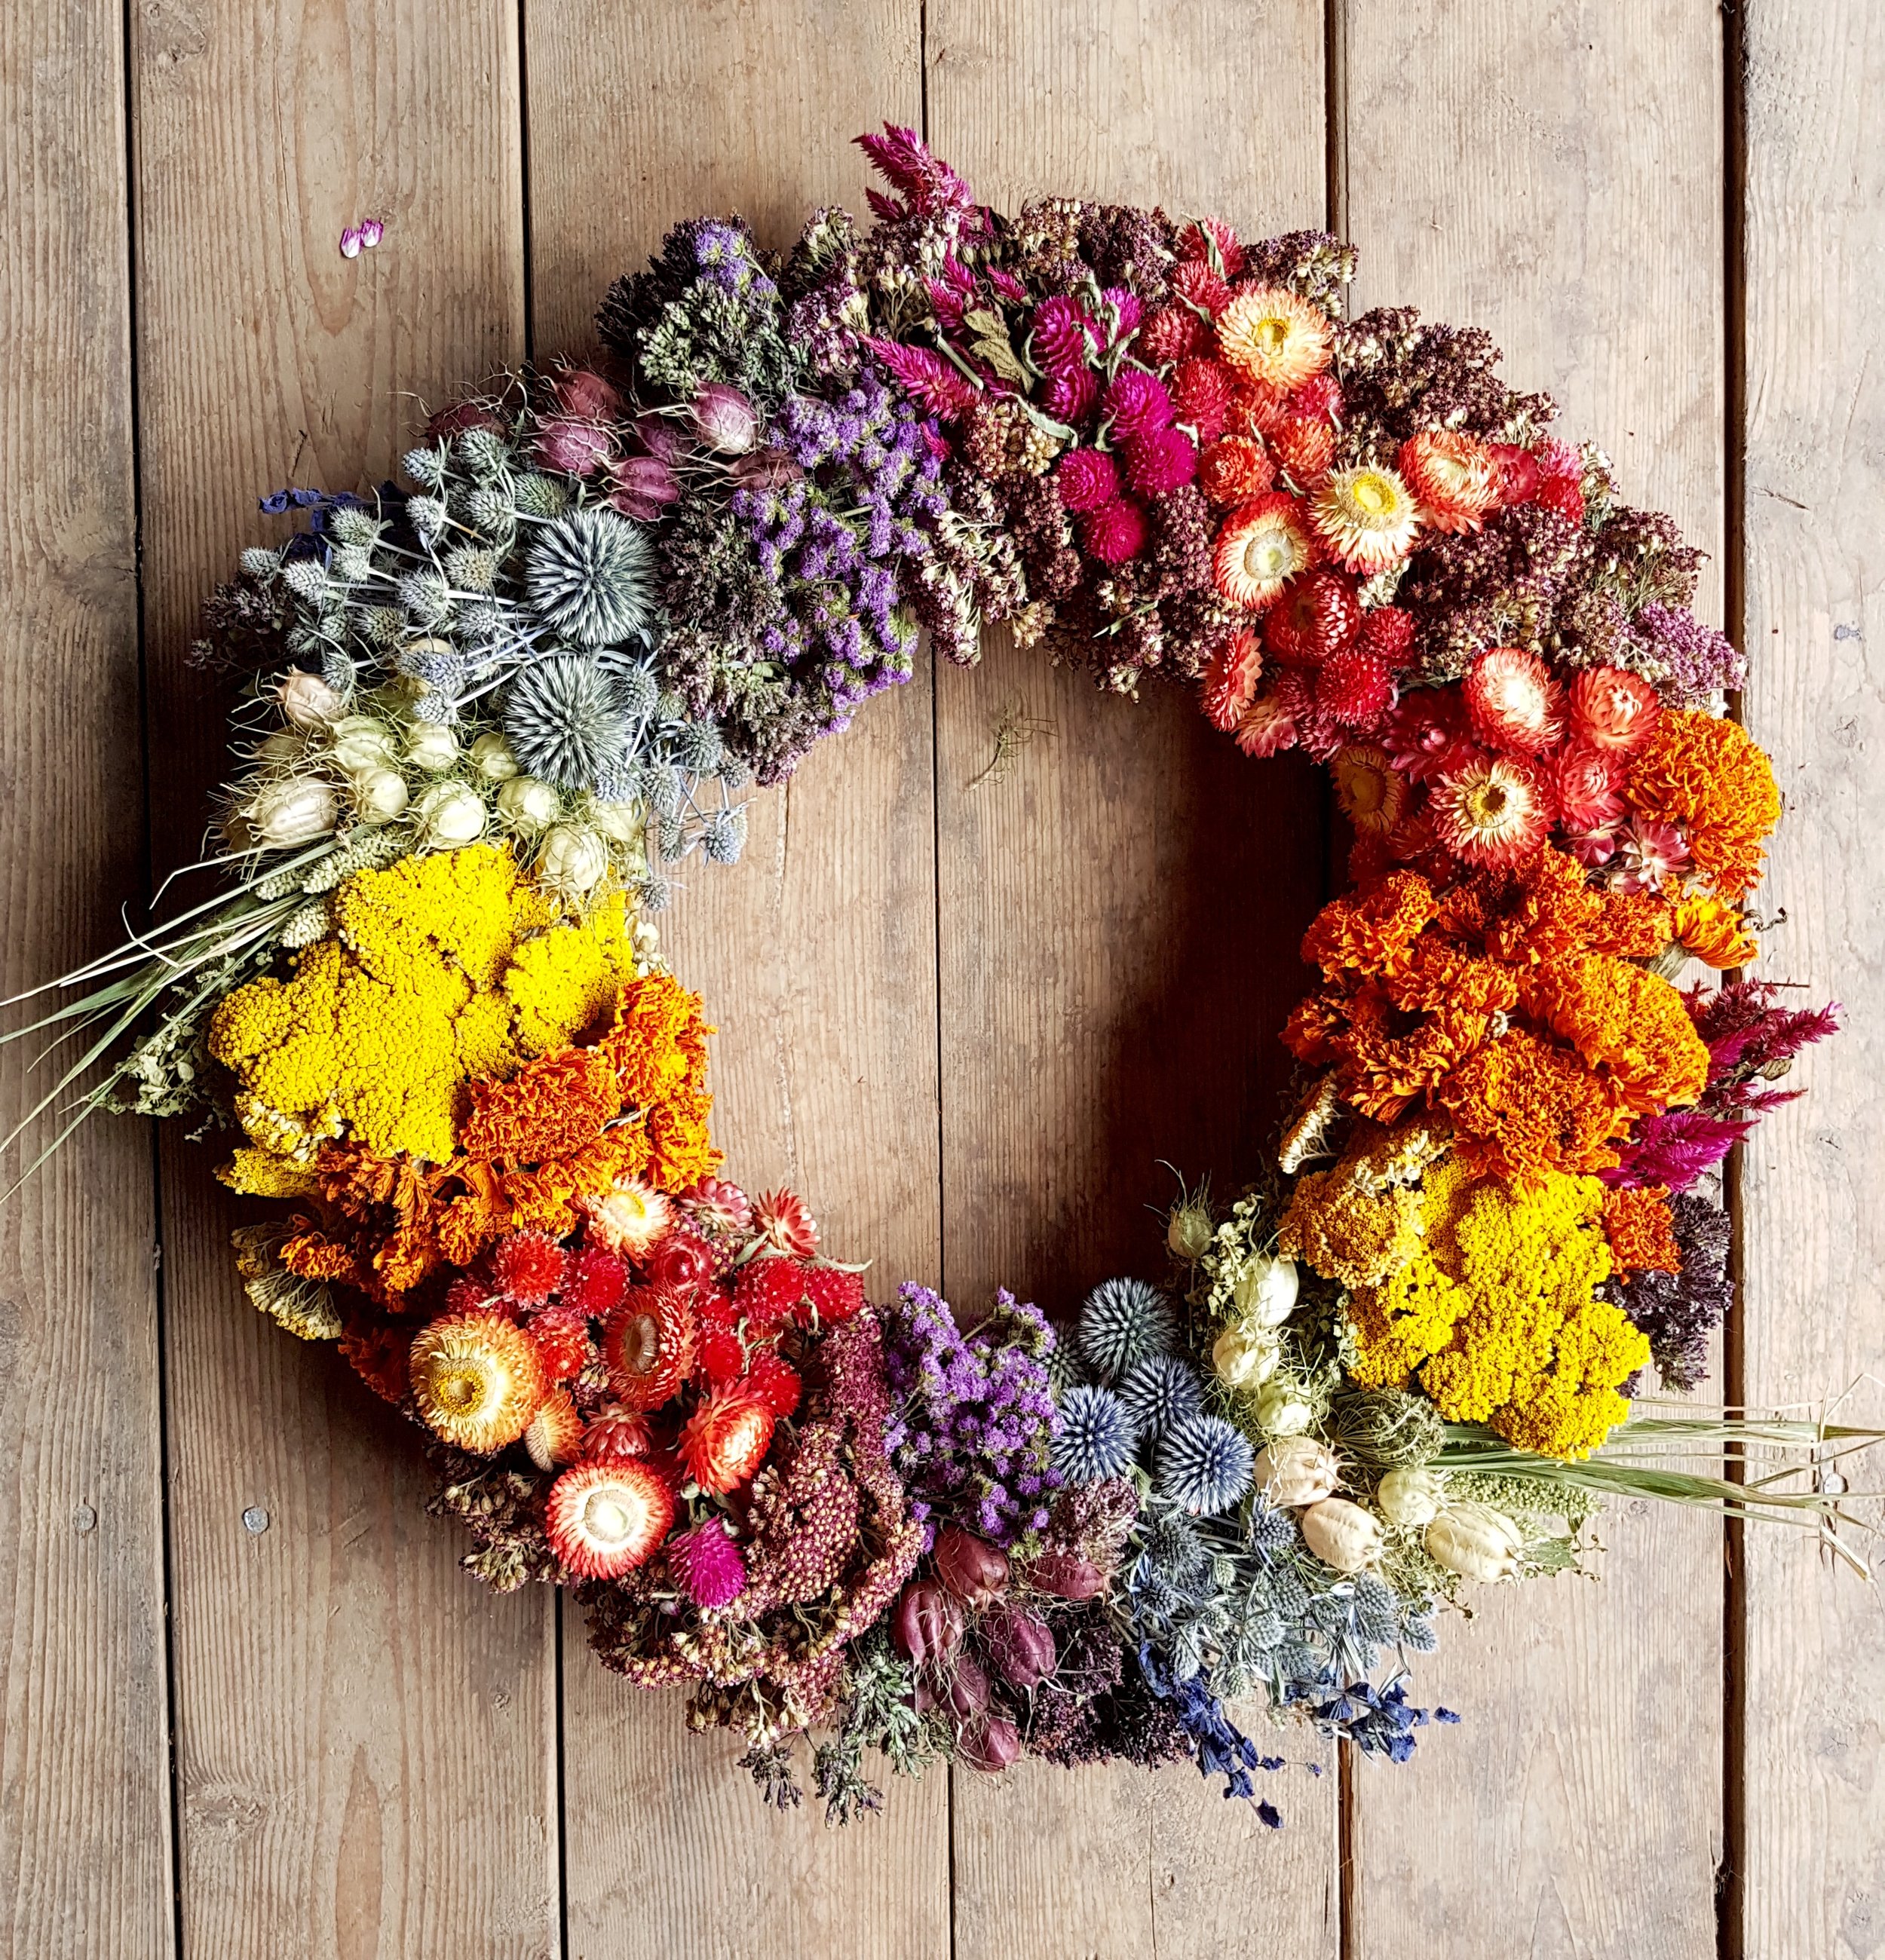 Extra Large Dried Flower Meadow WreathRainbow flower wreathSpring WreathSummer Wreath